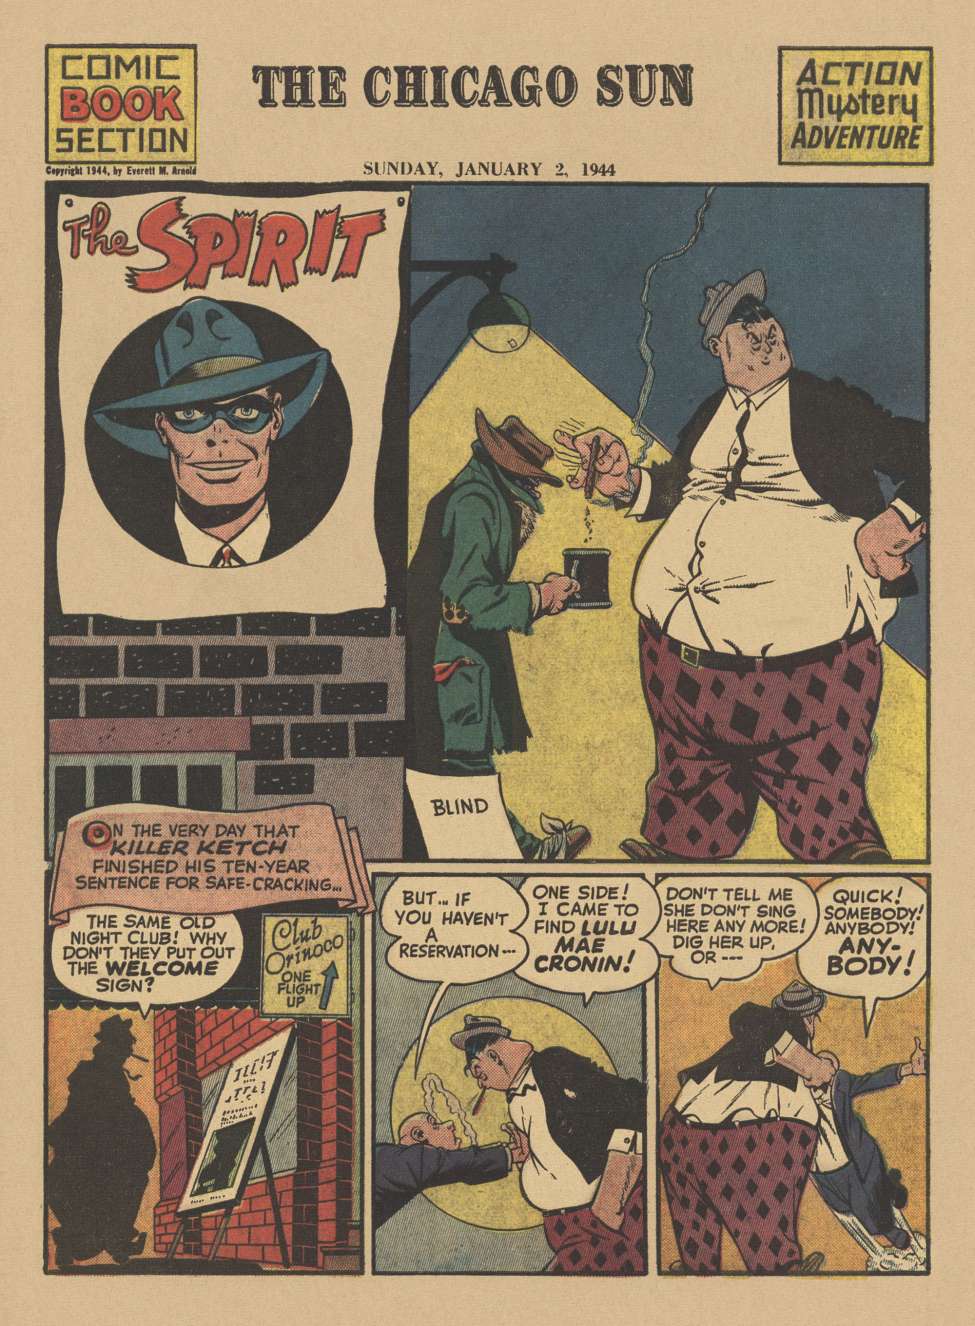 Book Cover For The Spirit (1944-01-02) - Chicago Sun